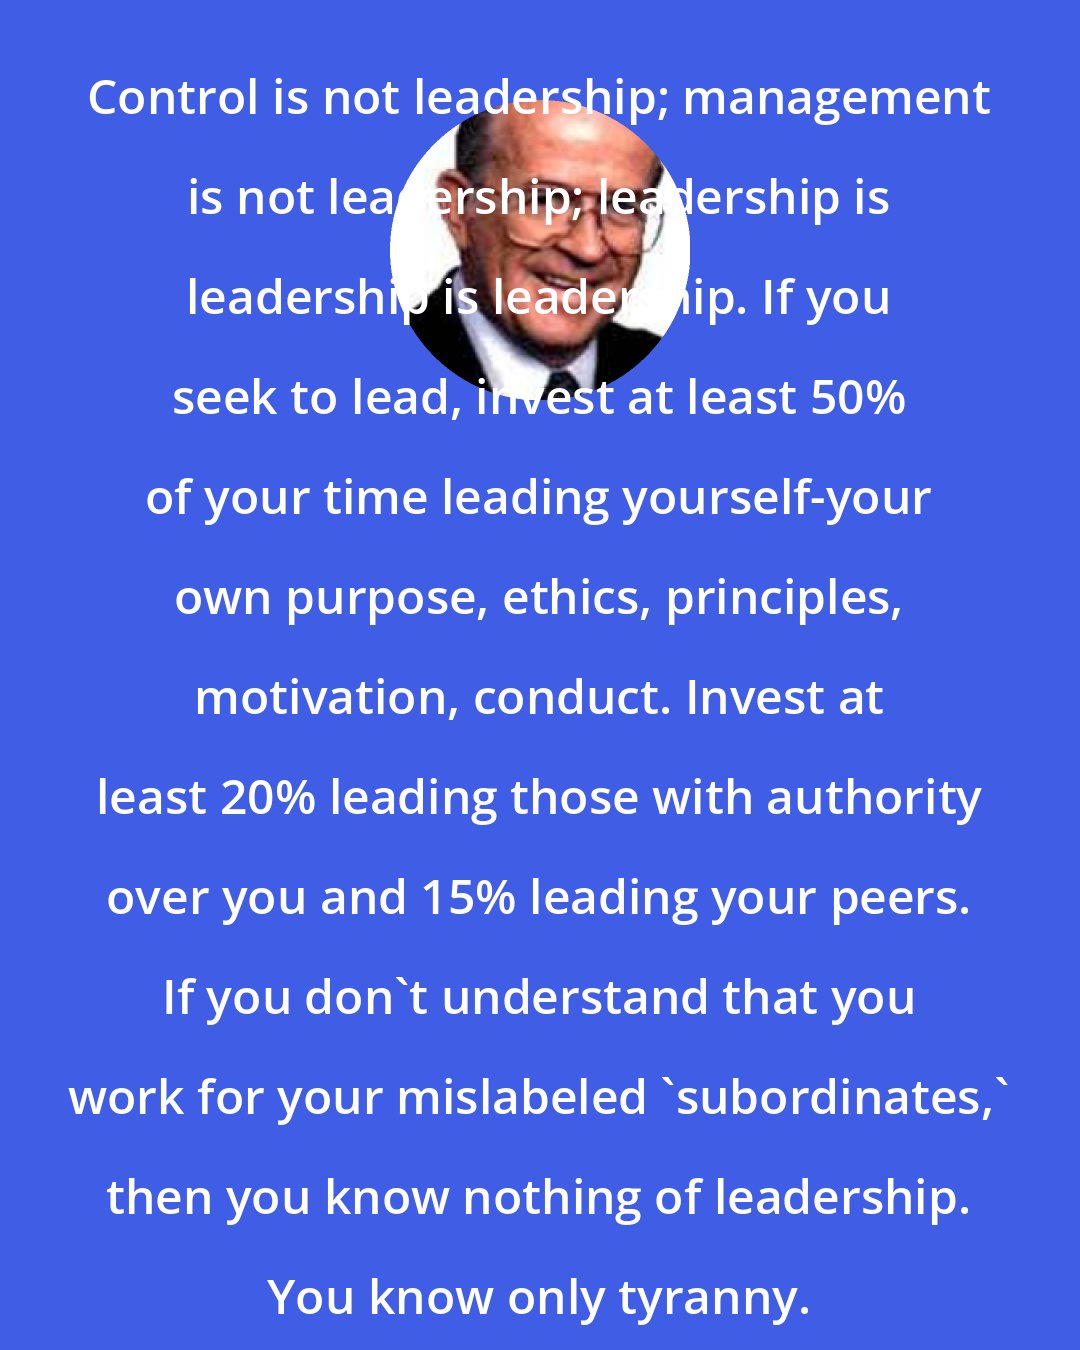 Dee Hock: Control is not leadership; management is not leadership; leadership is leadership is leadership. If you seek to lead, invest at least 50% of your time leading yourself-your own purpose, ethics, principles, motivation, conduct. Invest at least 20% leading those with authority over you and 15% leading your peers. If you don't understand that you work for your mislabeled 'subordinates,' then you know nothing of leadership. You know only tyranny.